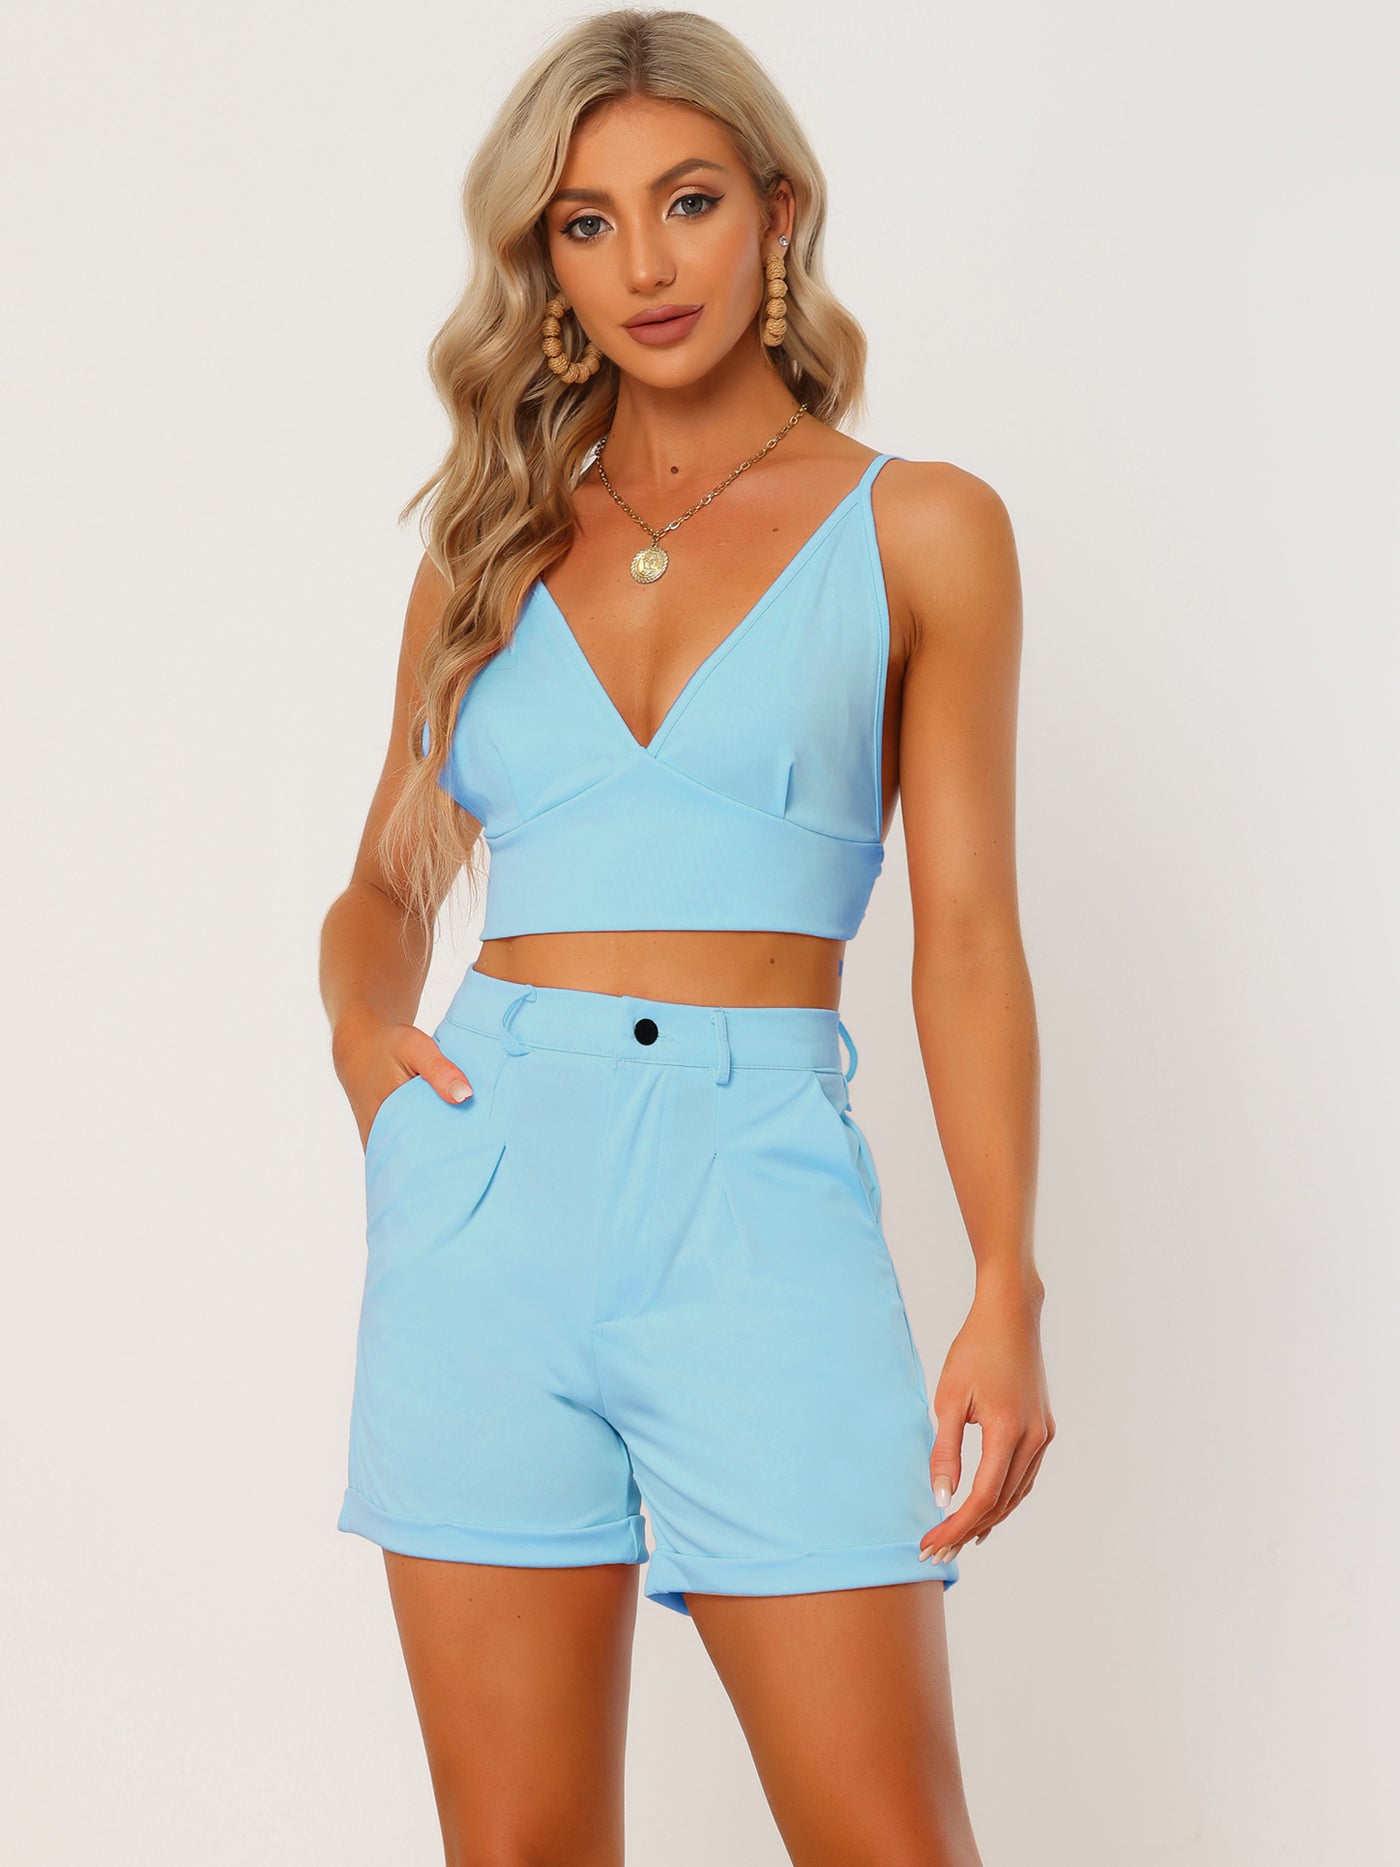 Allegra K Casual Sleeveless Knot Back Crop Top Camisole Shorts 2 Piece